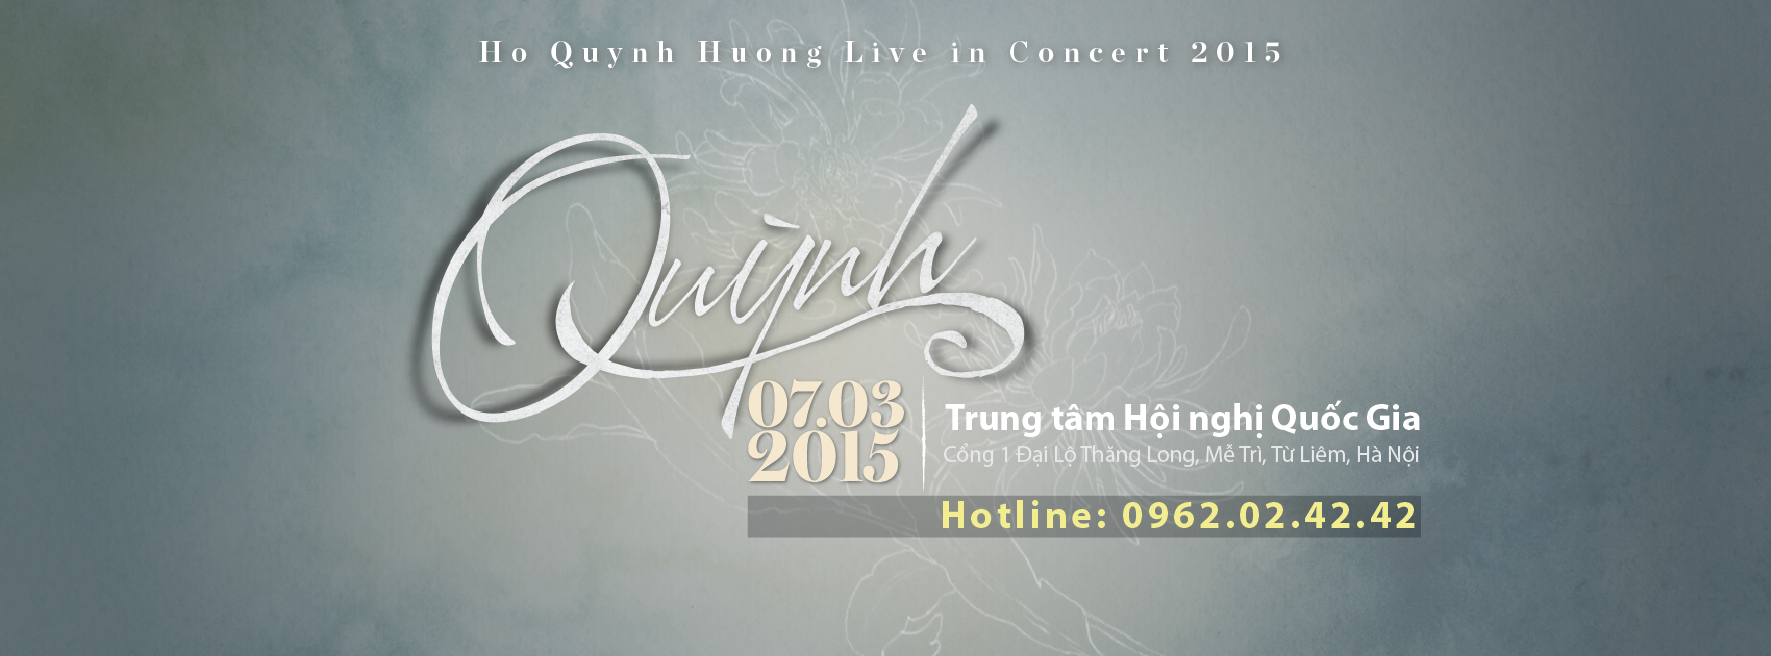 Concert_Quynh